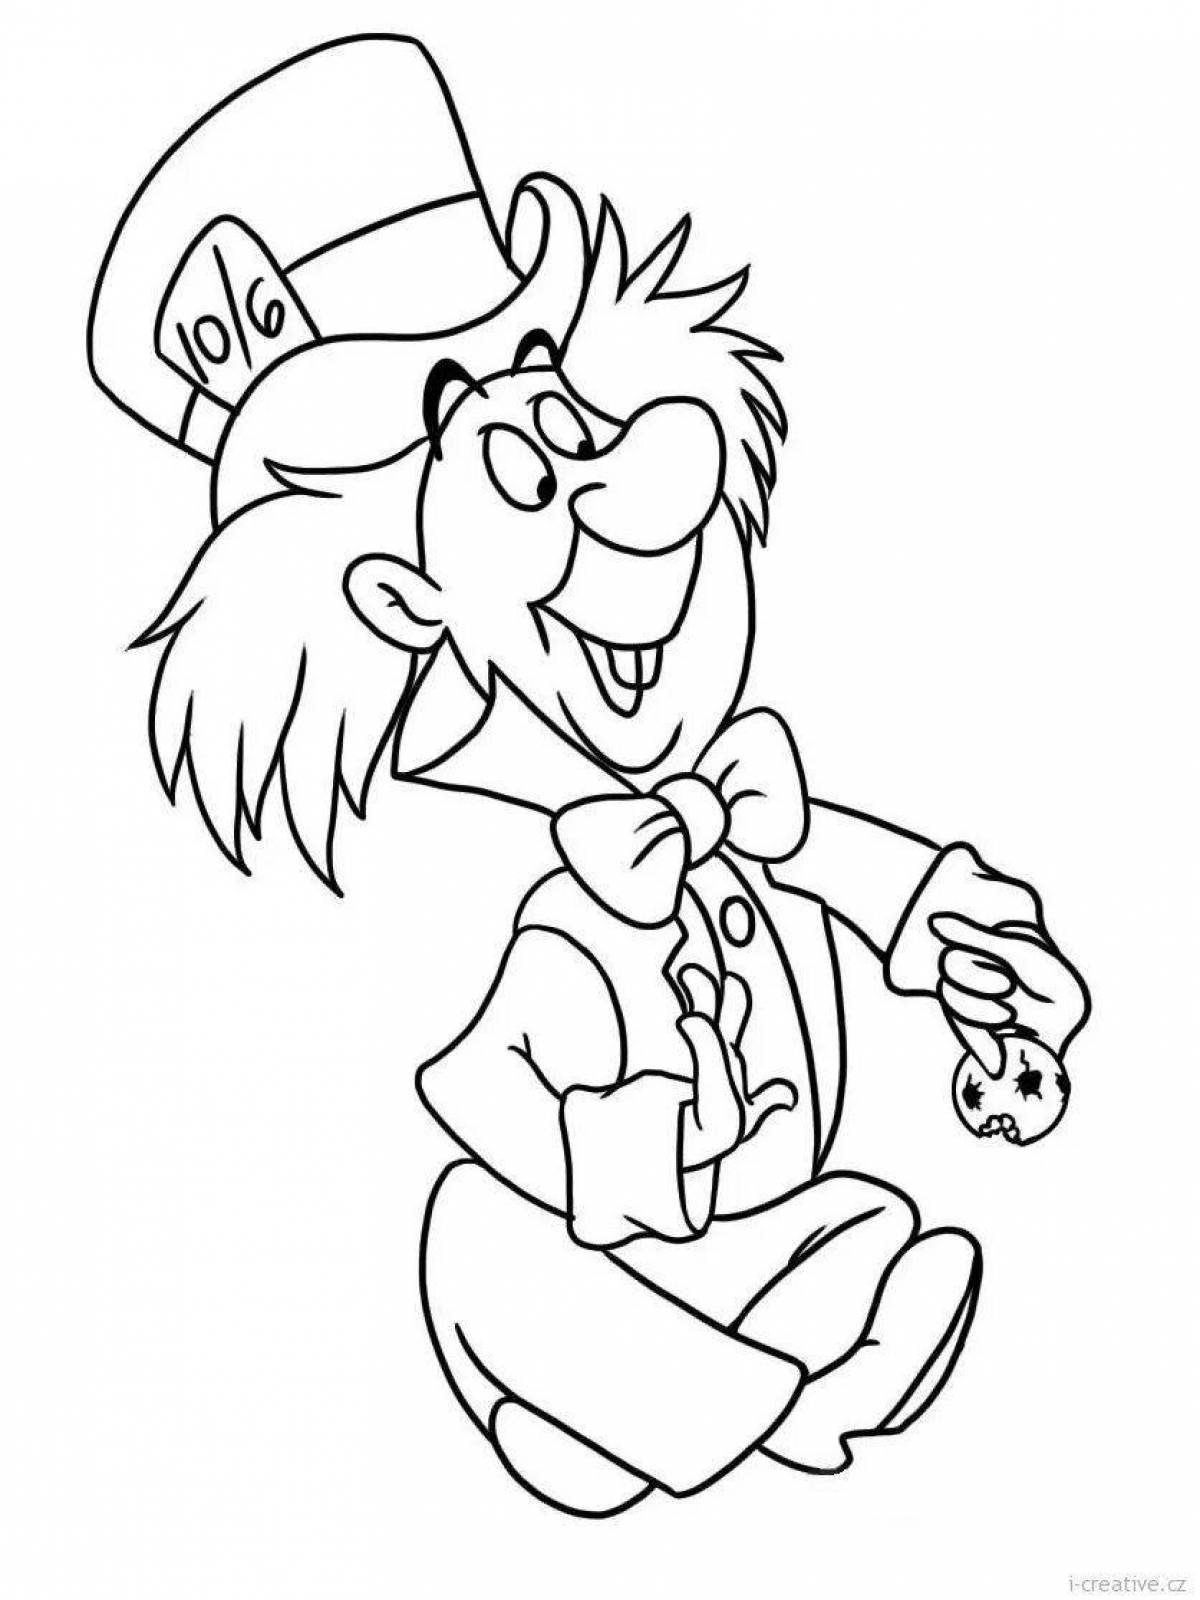 Gorgeous Hatter coloring page